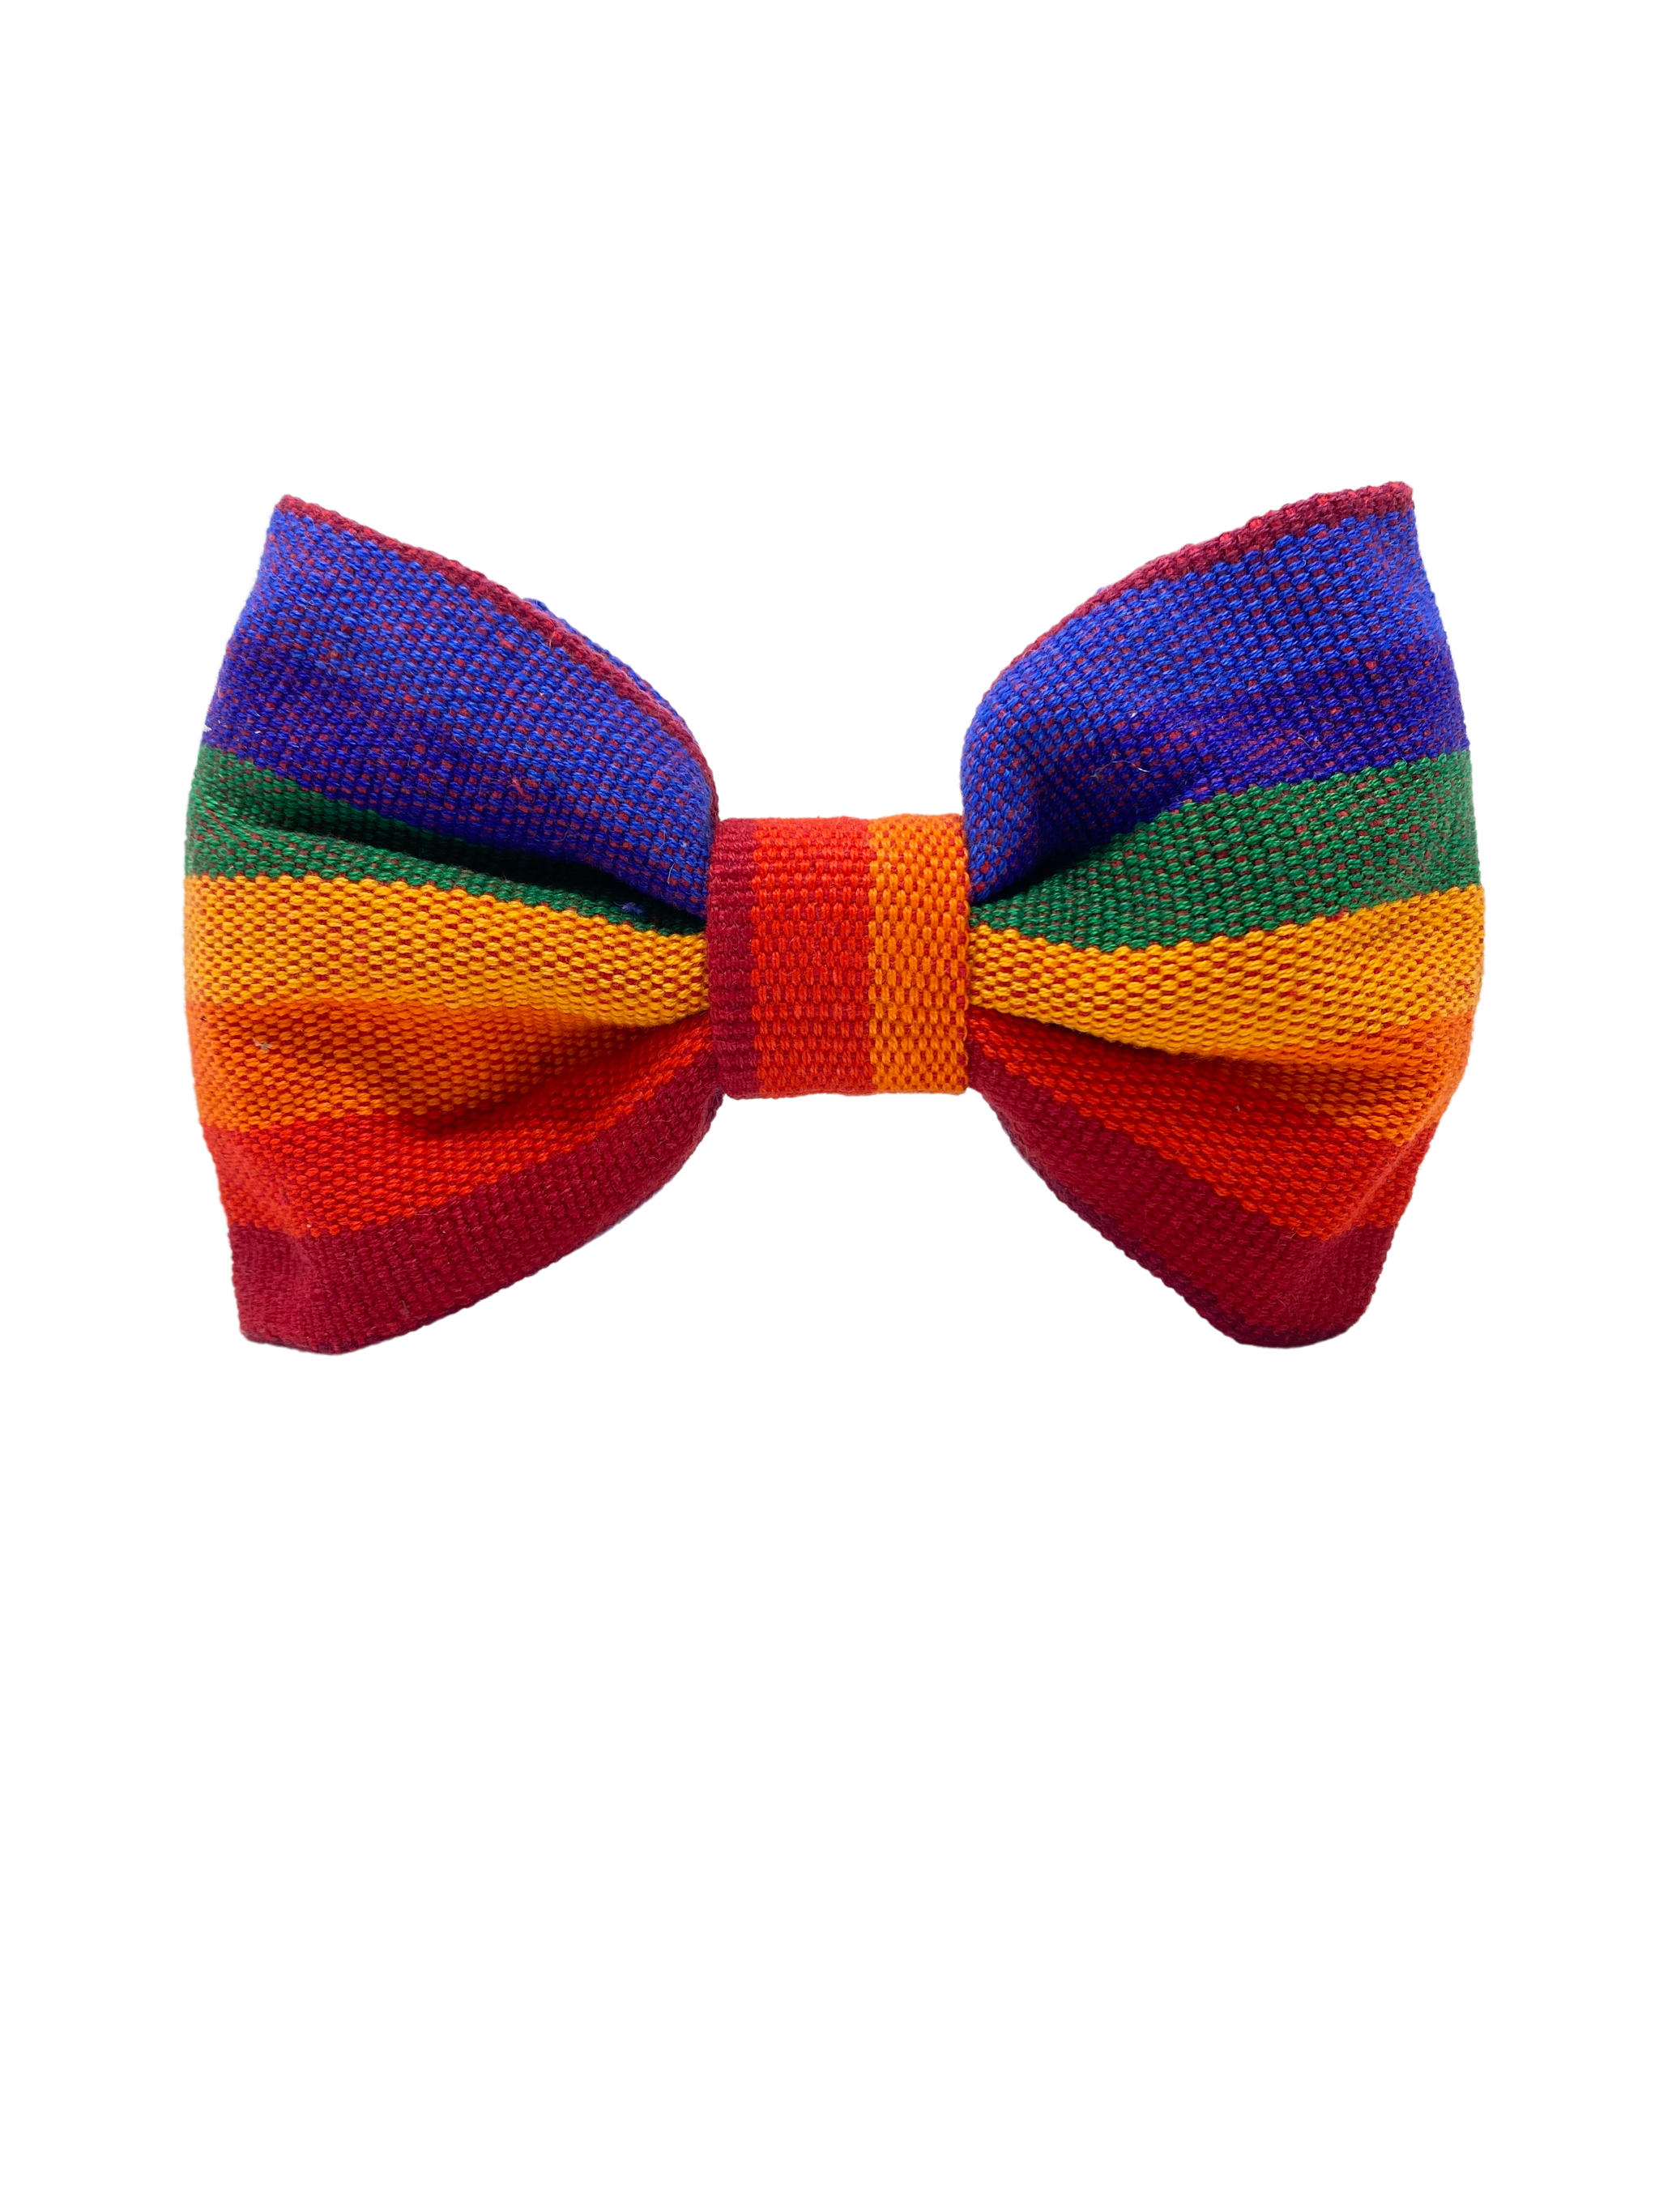 Handwoven Pet Bow Tie- A Case of the Stripes